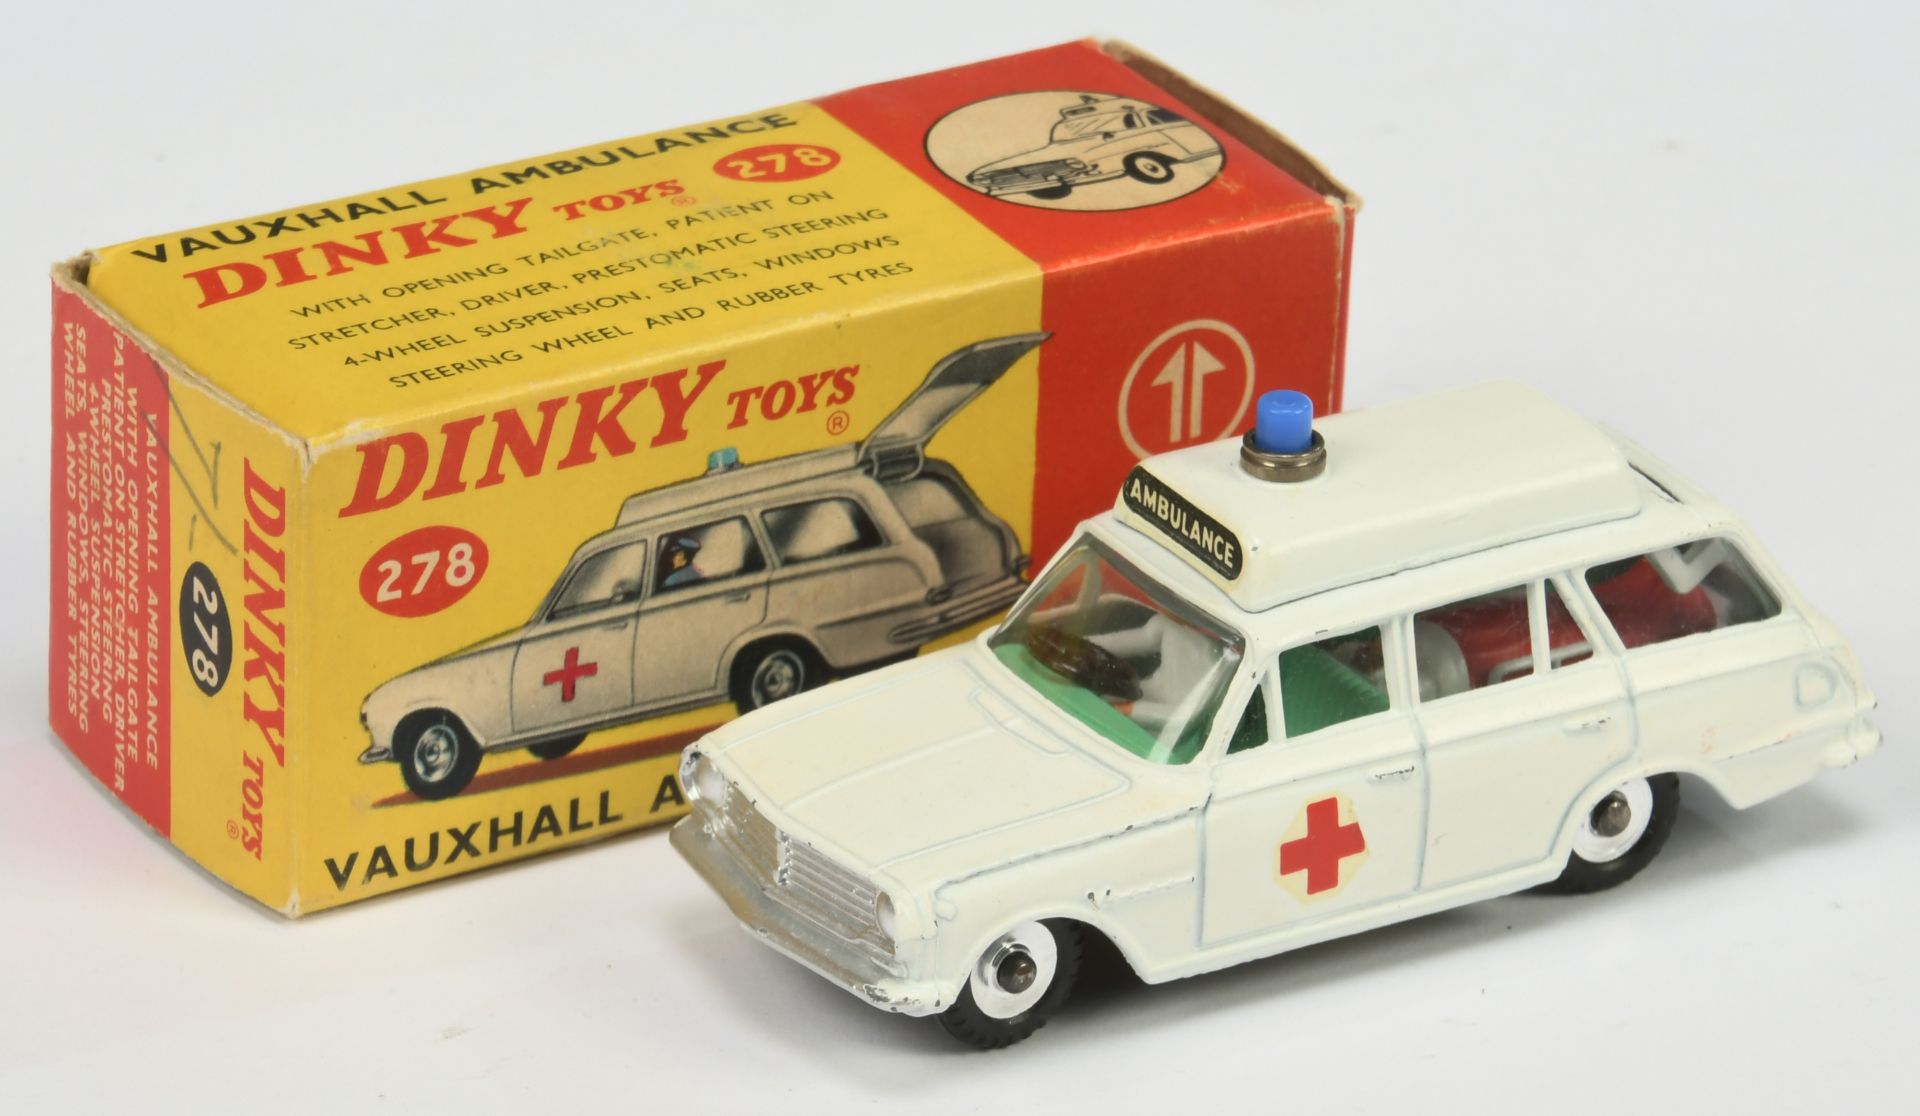 Dinky Toys 278 Vauxhall Estate "Ambulance" - White body, green interior with figure and patient o...